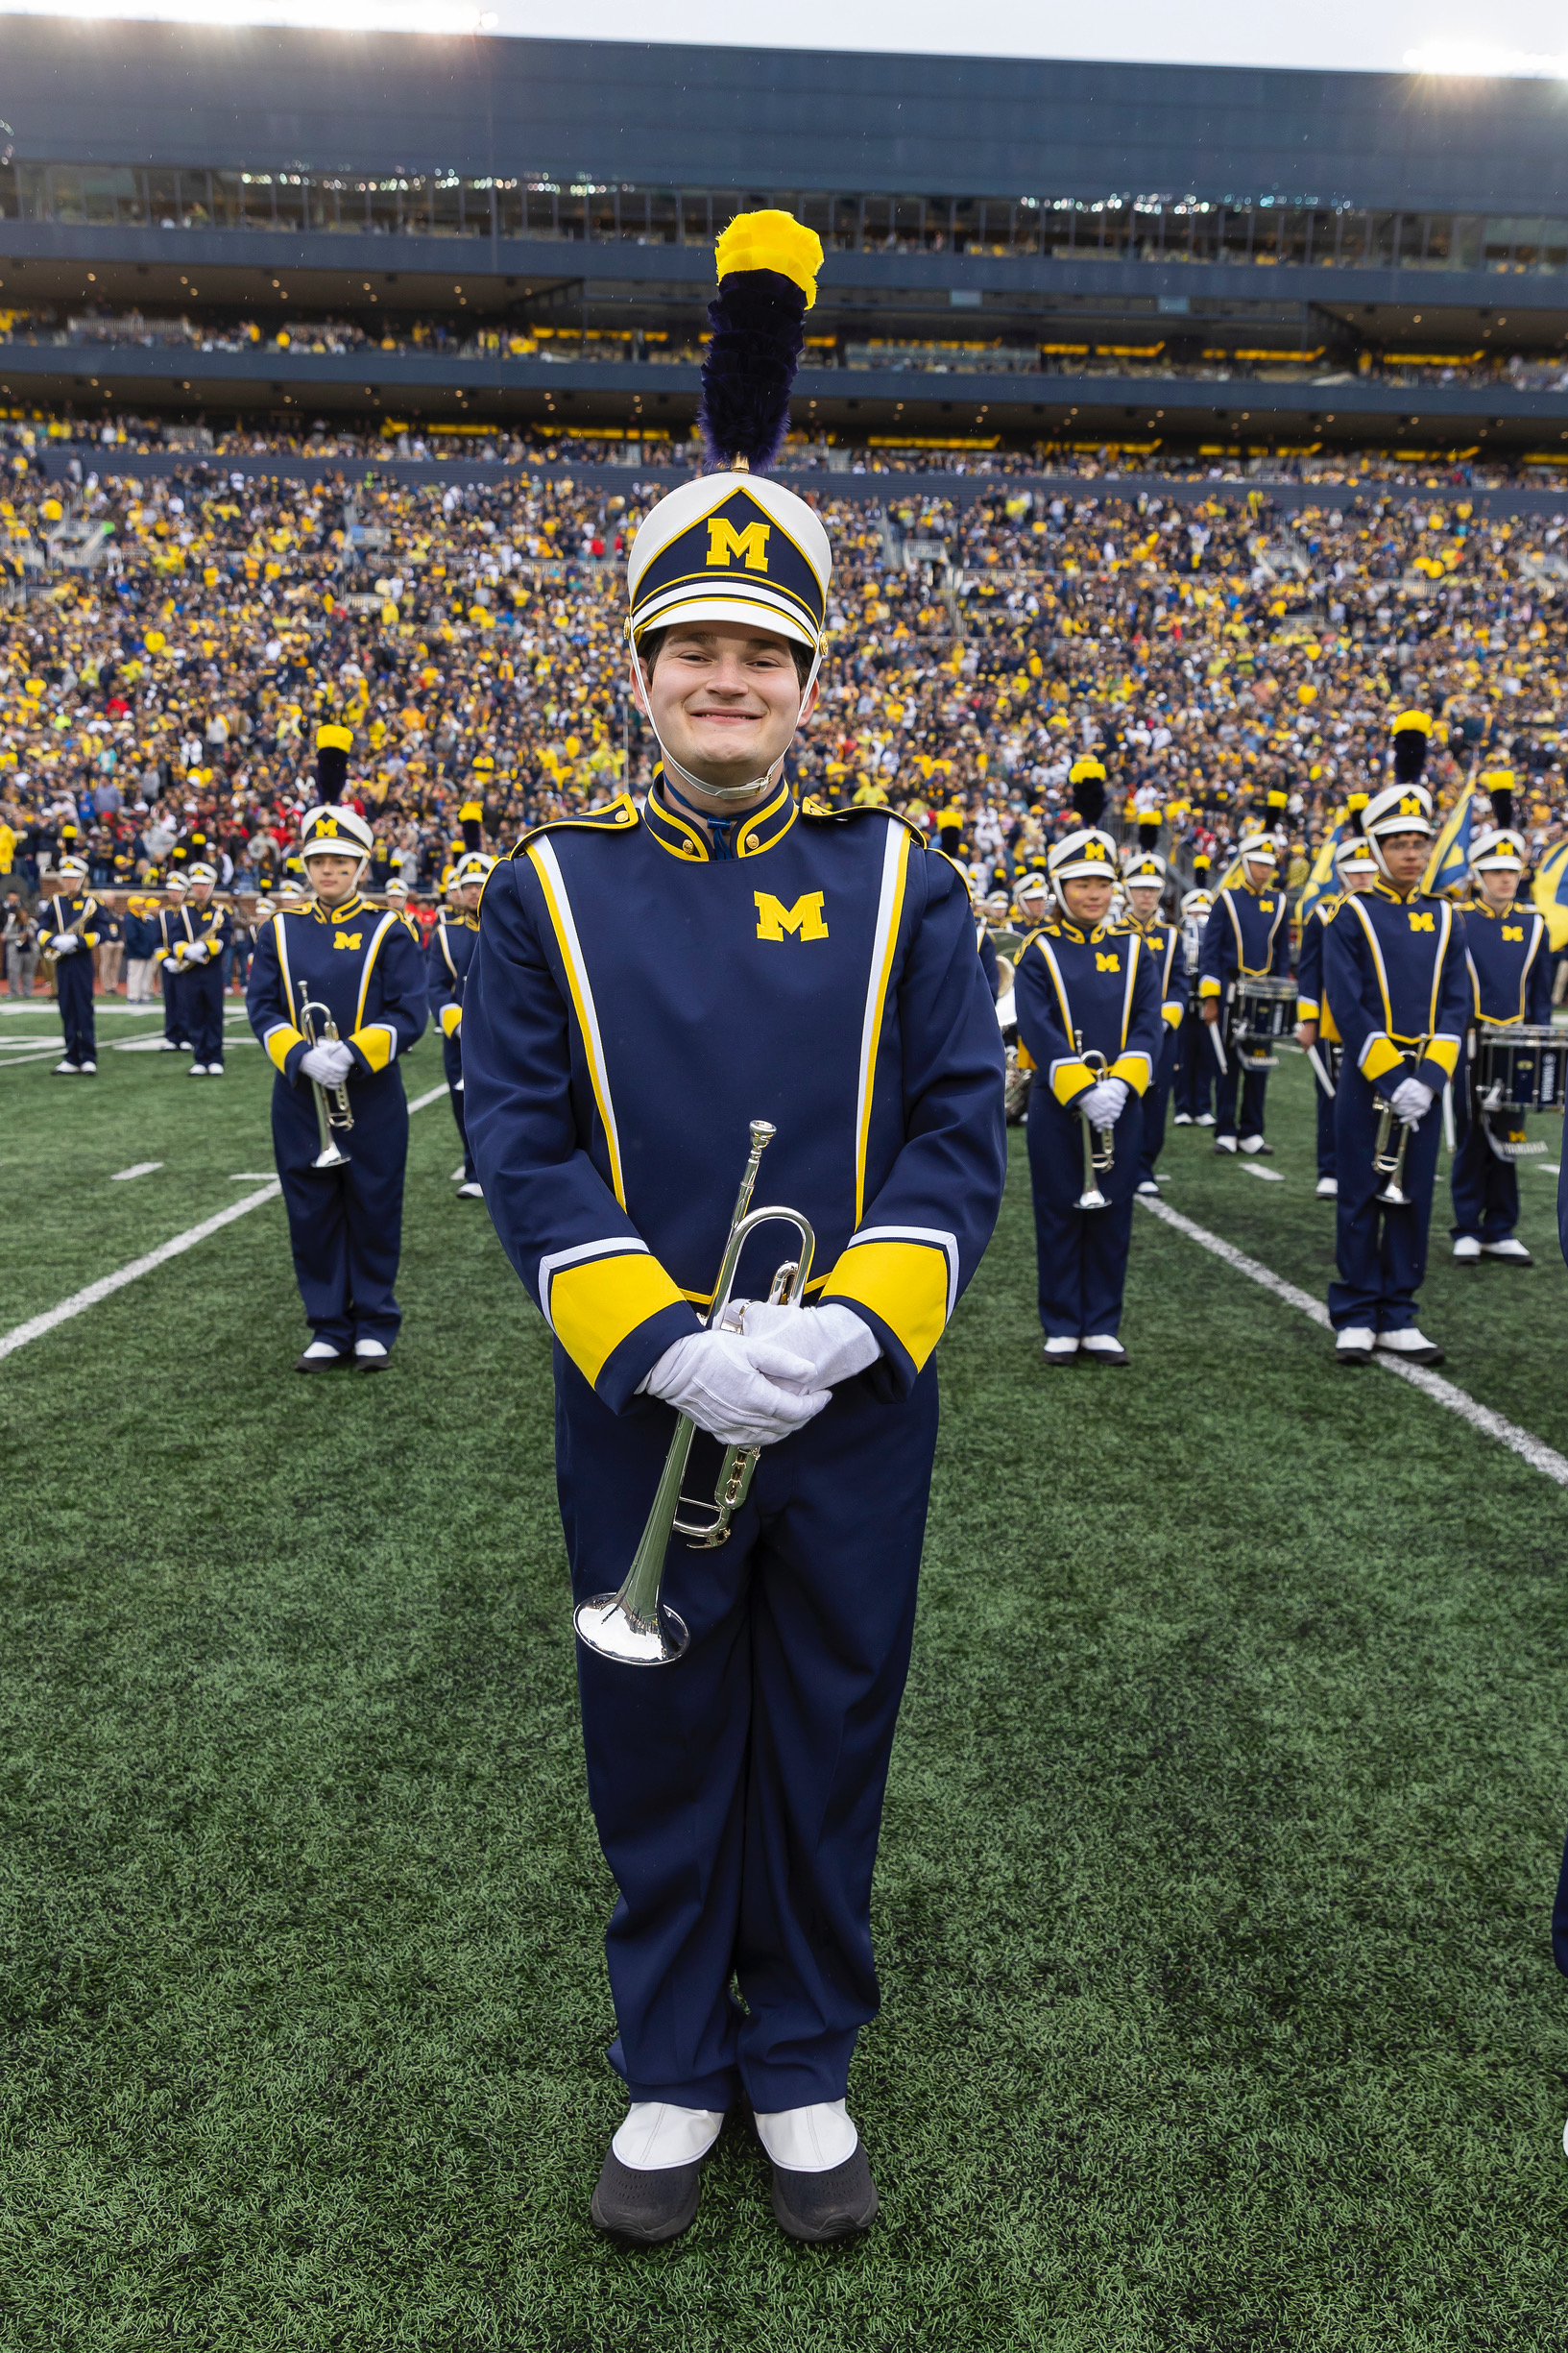 A photo of me in the Michigan Marching Band